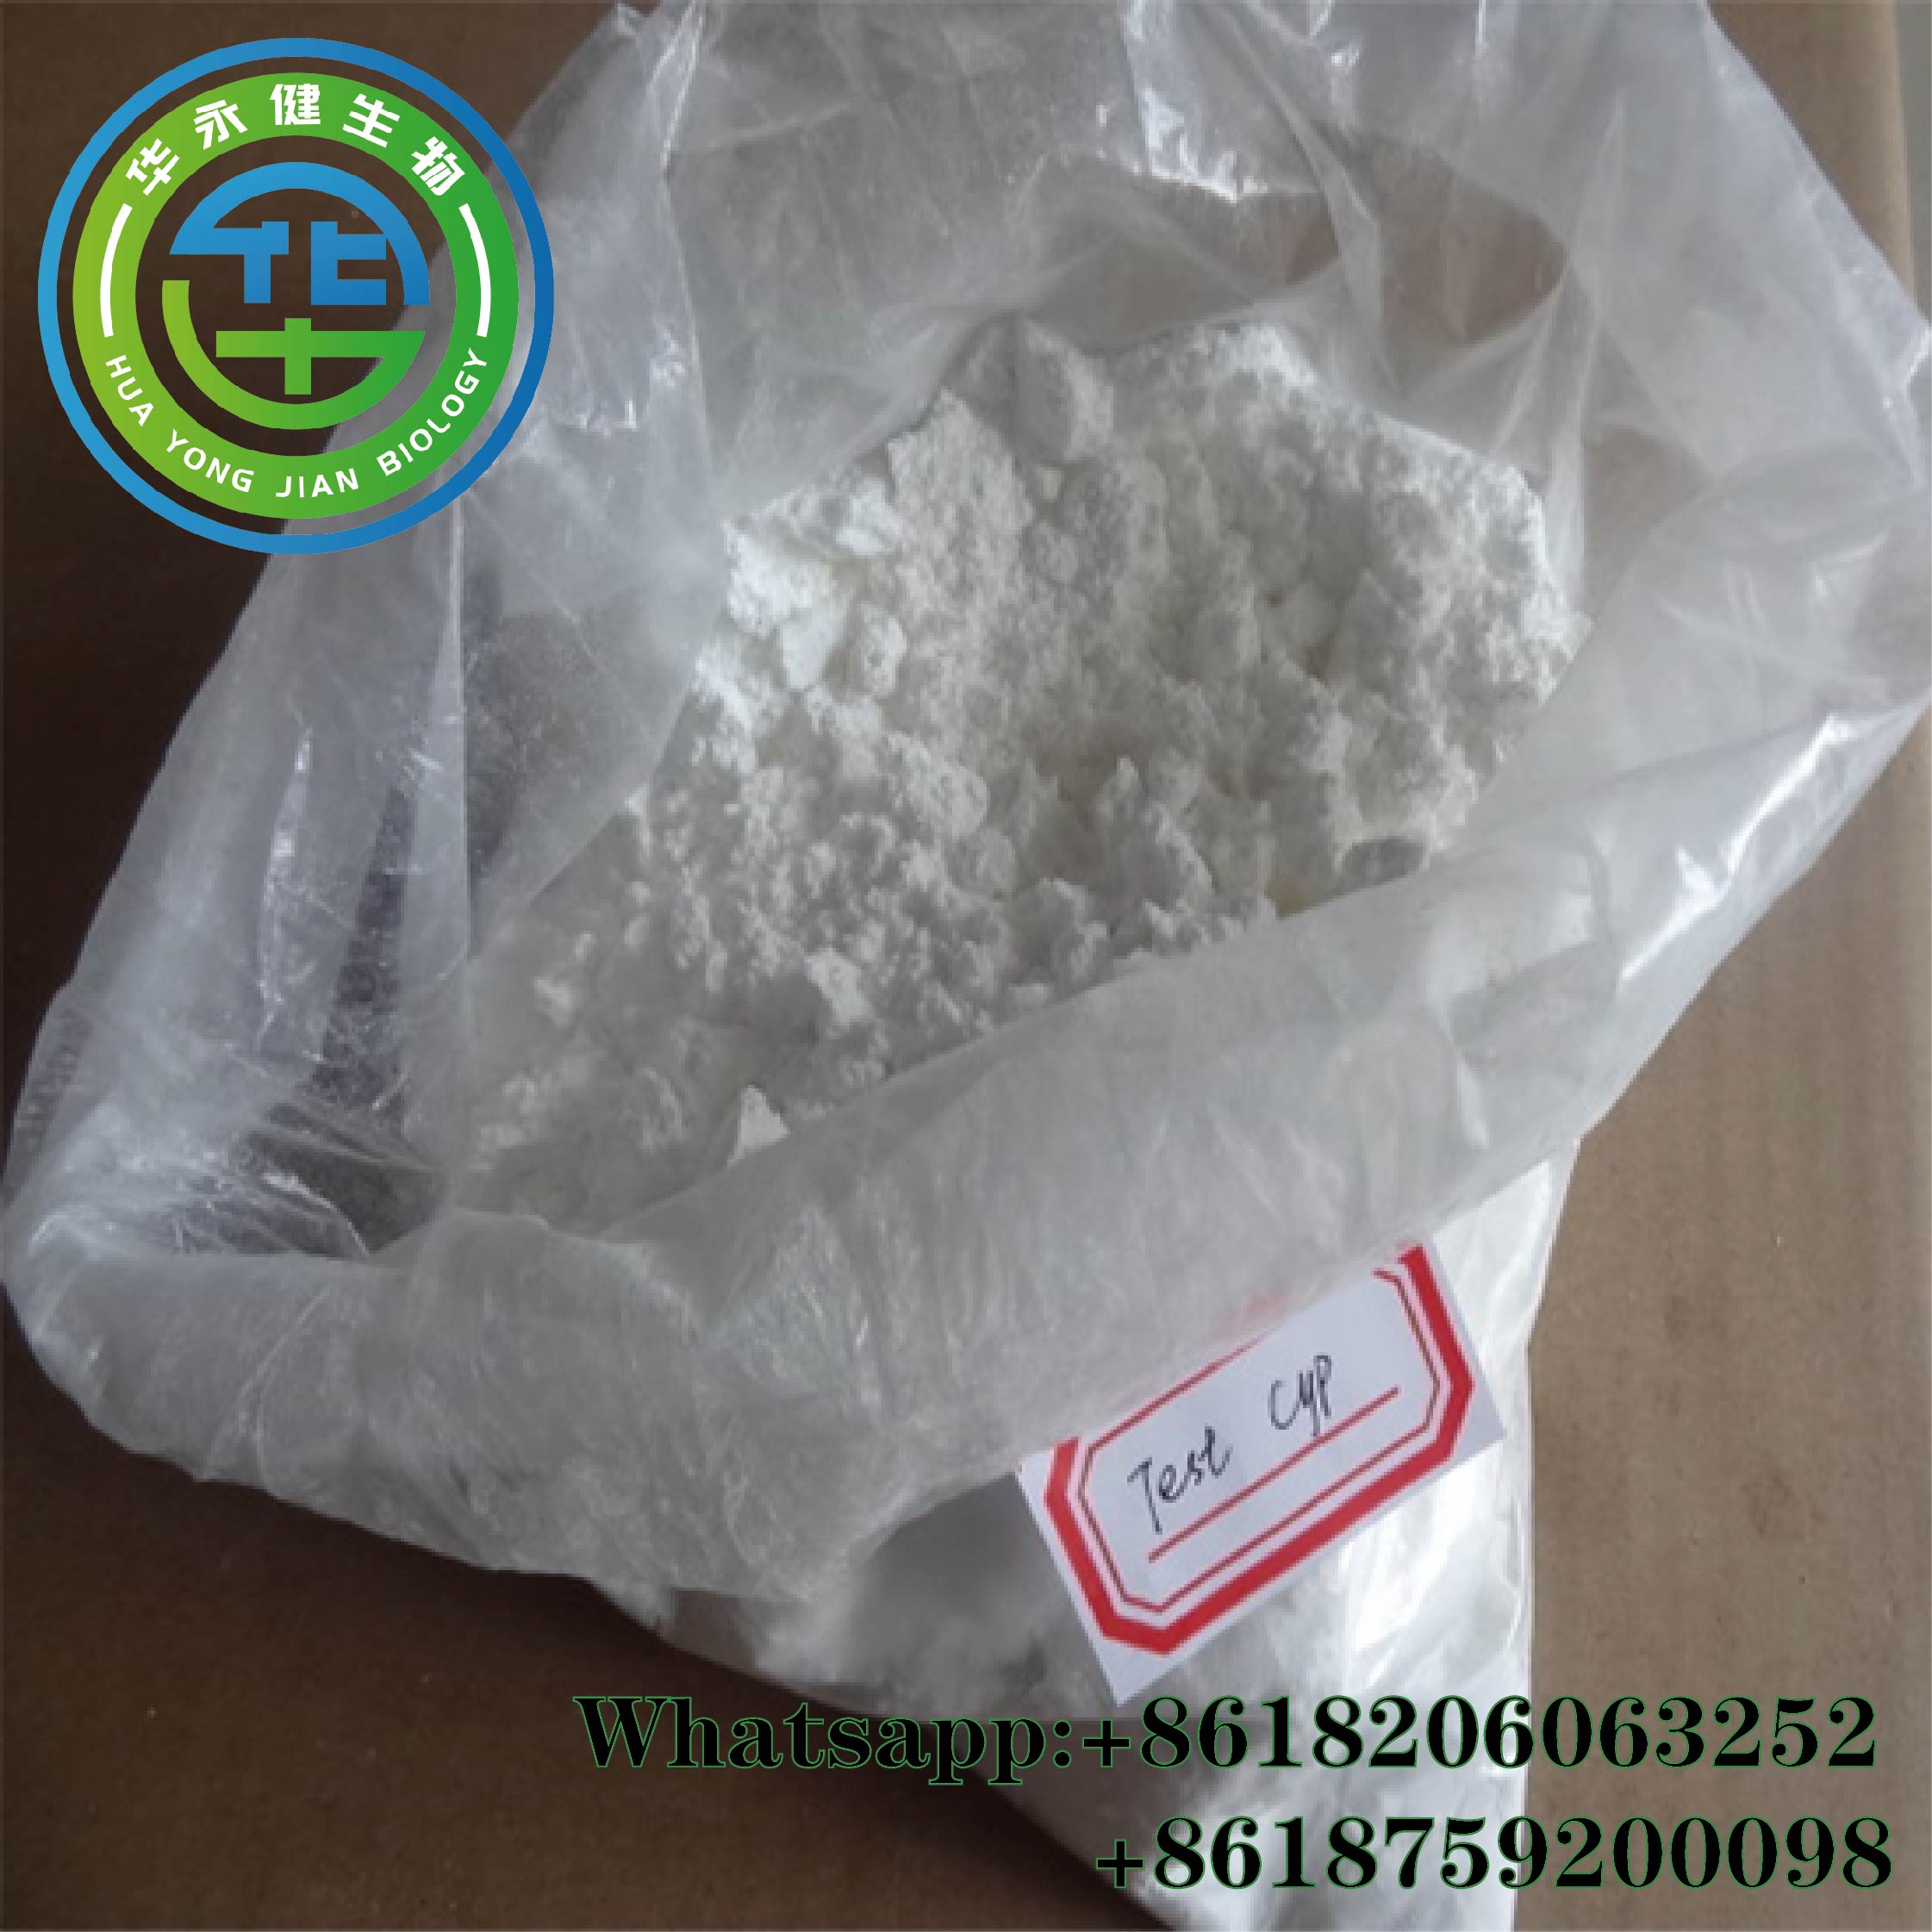 Effective Legal Testosterone Cypionate Steroid Powder Health Care Test Cyp Muscle Supplement Test C CasNO.58-20-8 